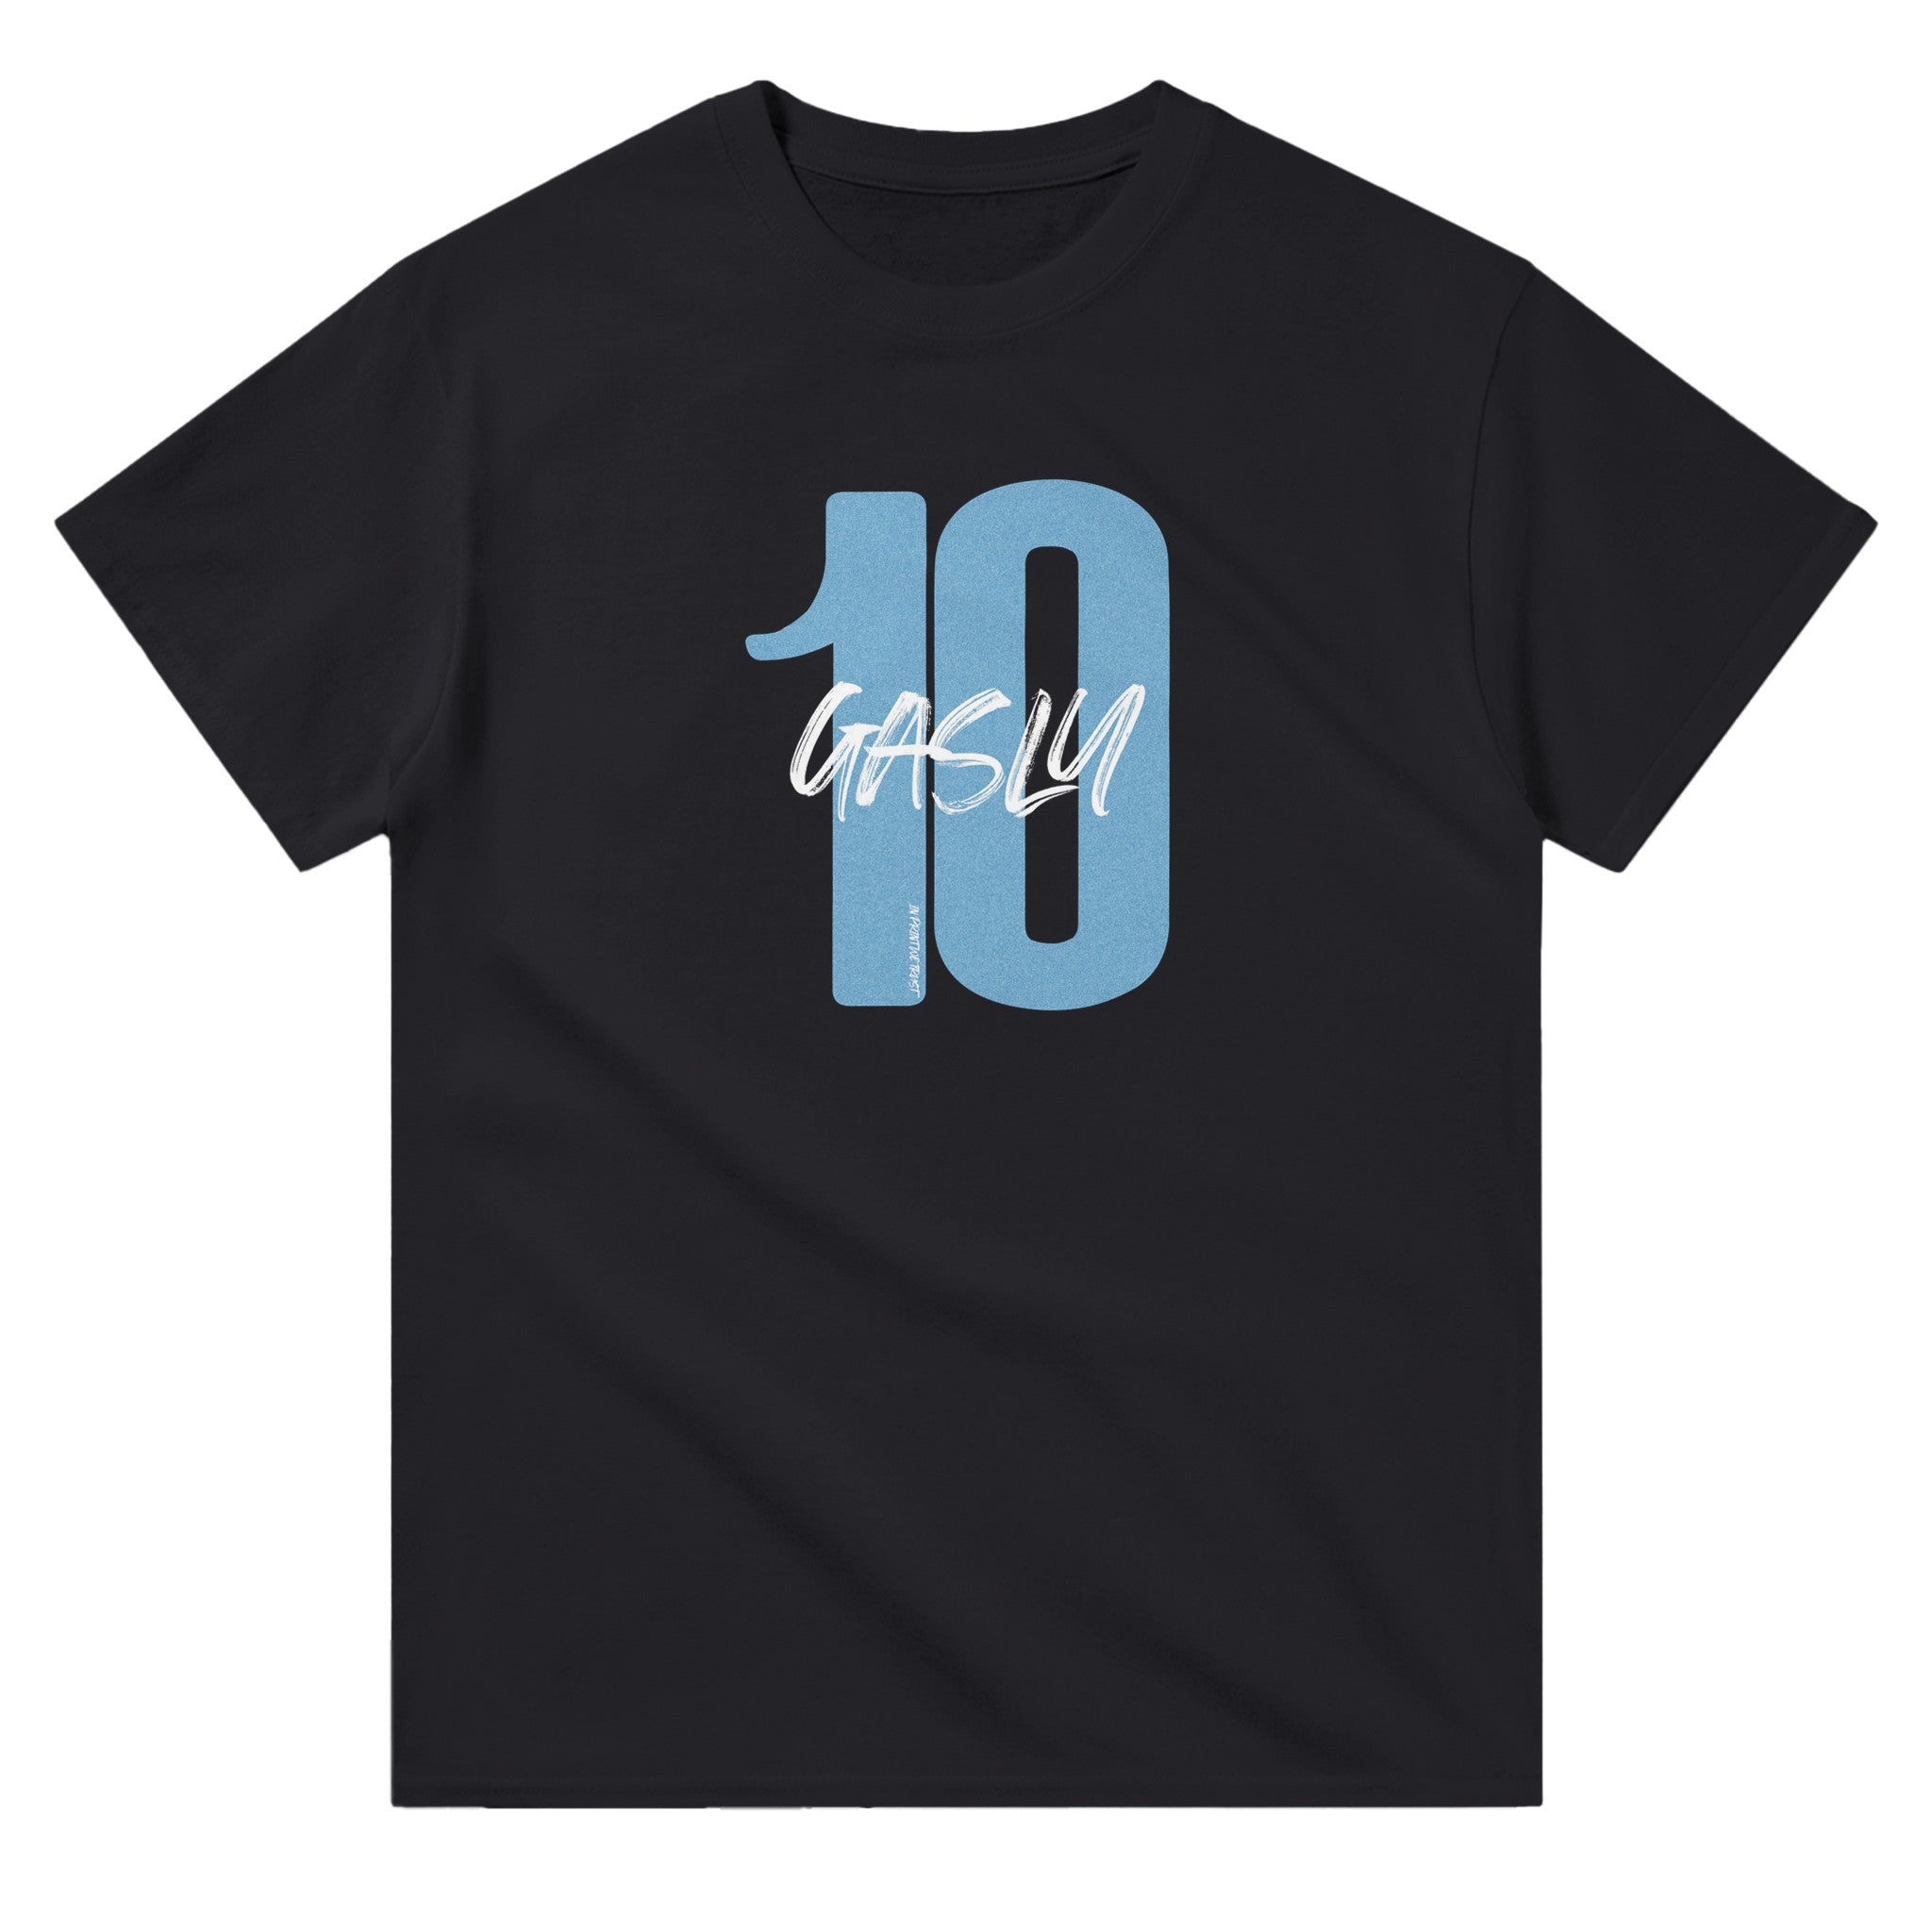 'Gasly 10' classic tee - In Print We Trust